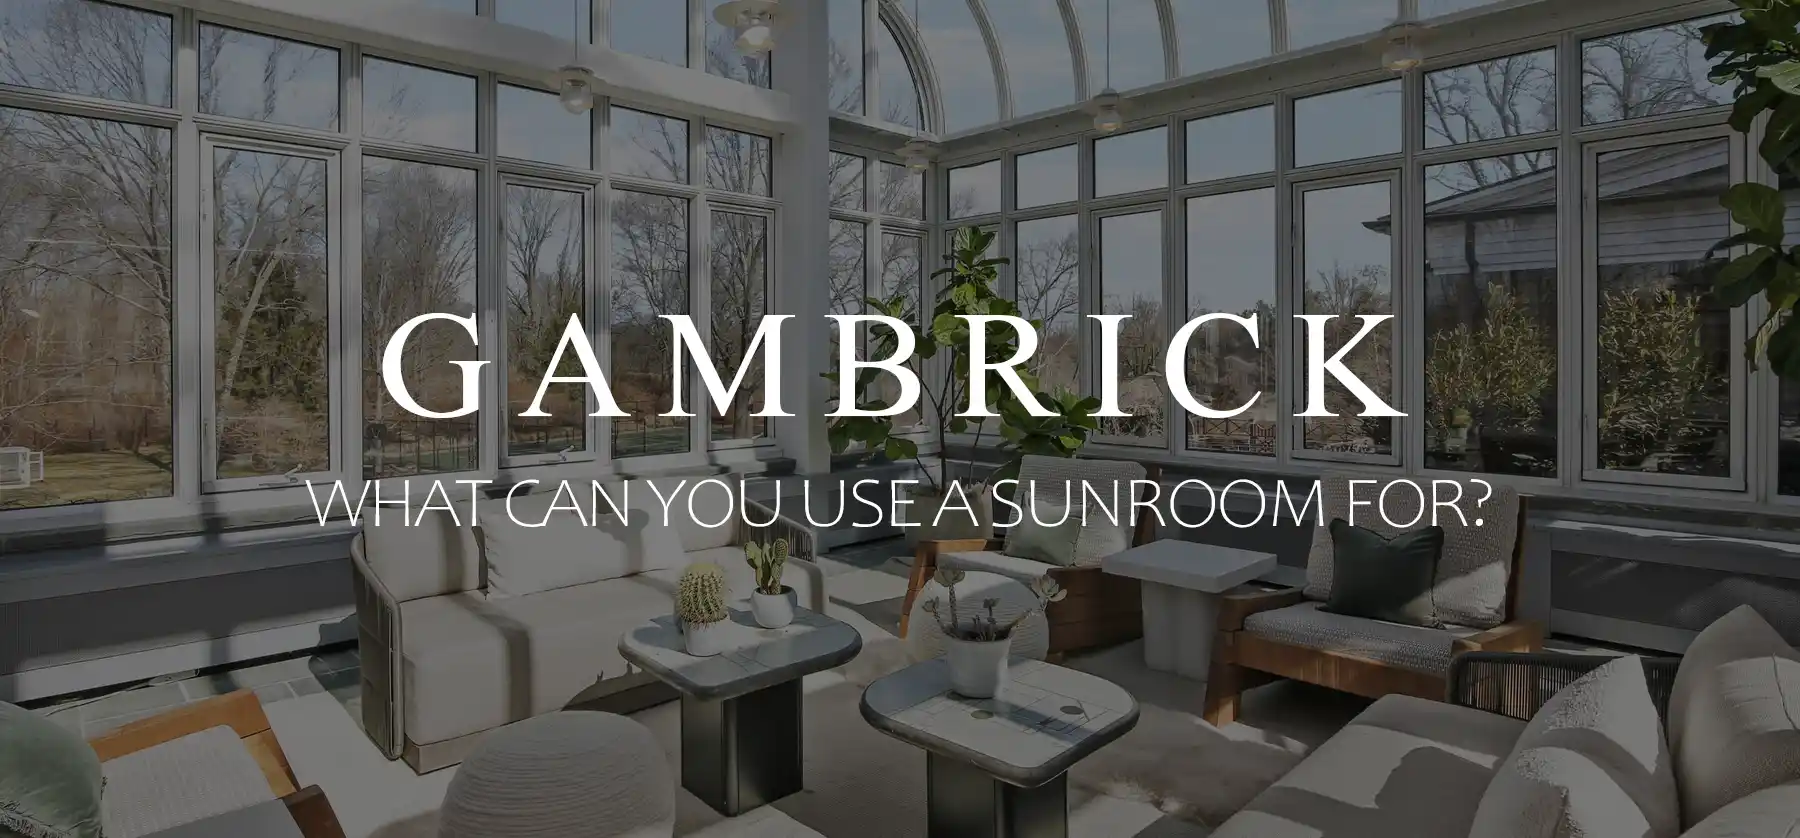 what can you use a sunroom for banner 1.0